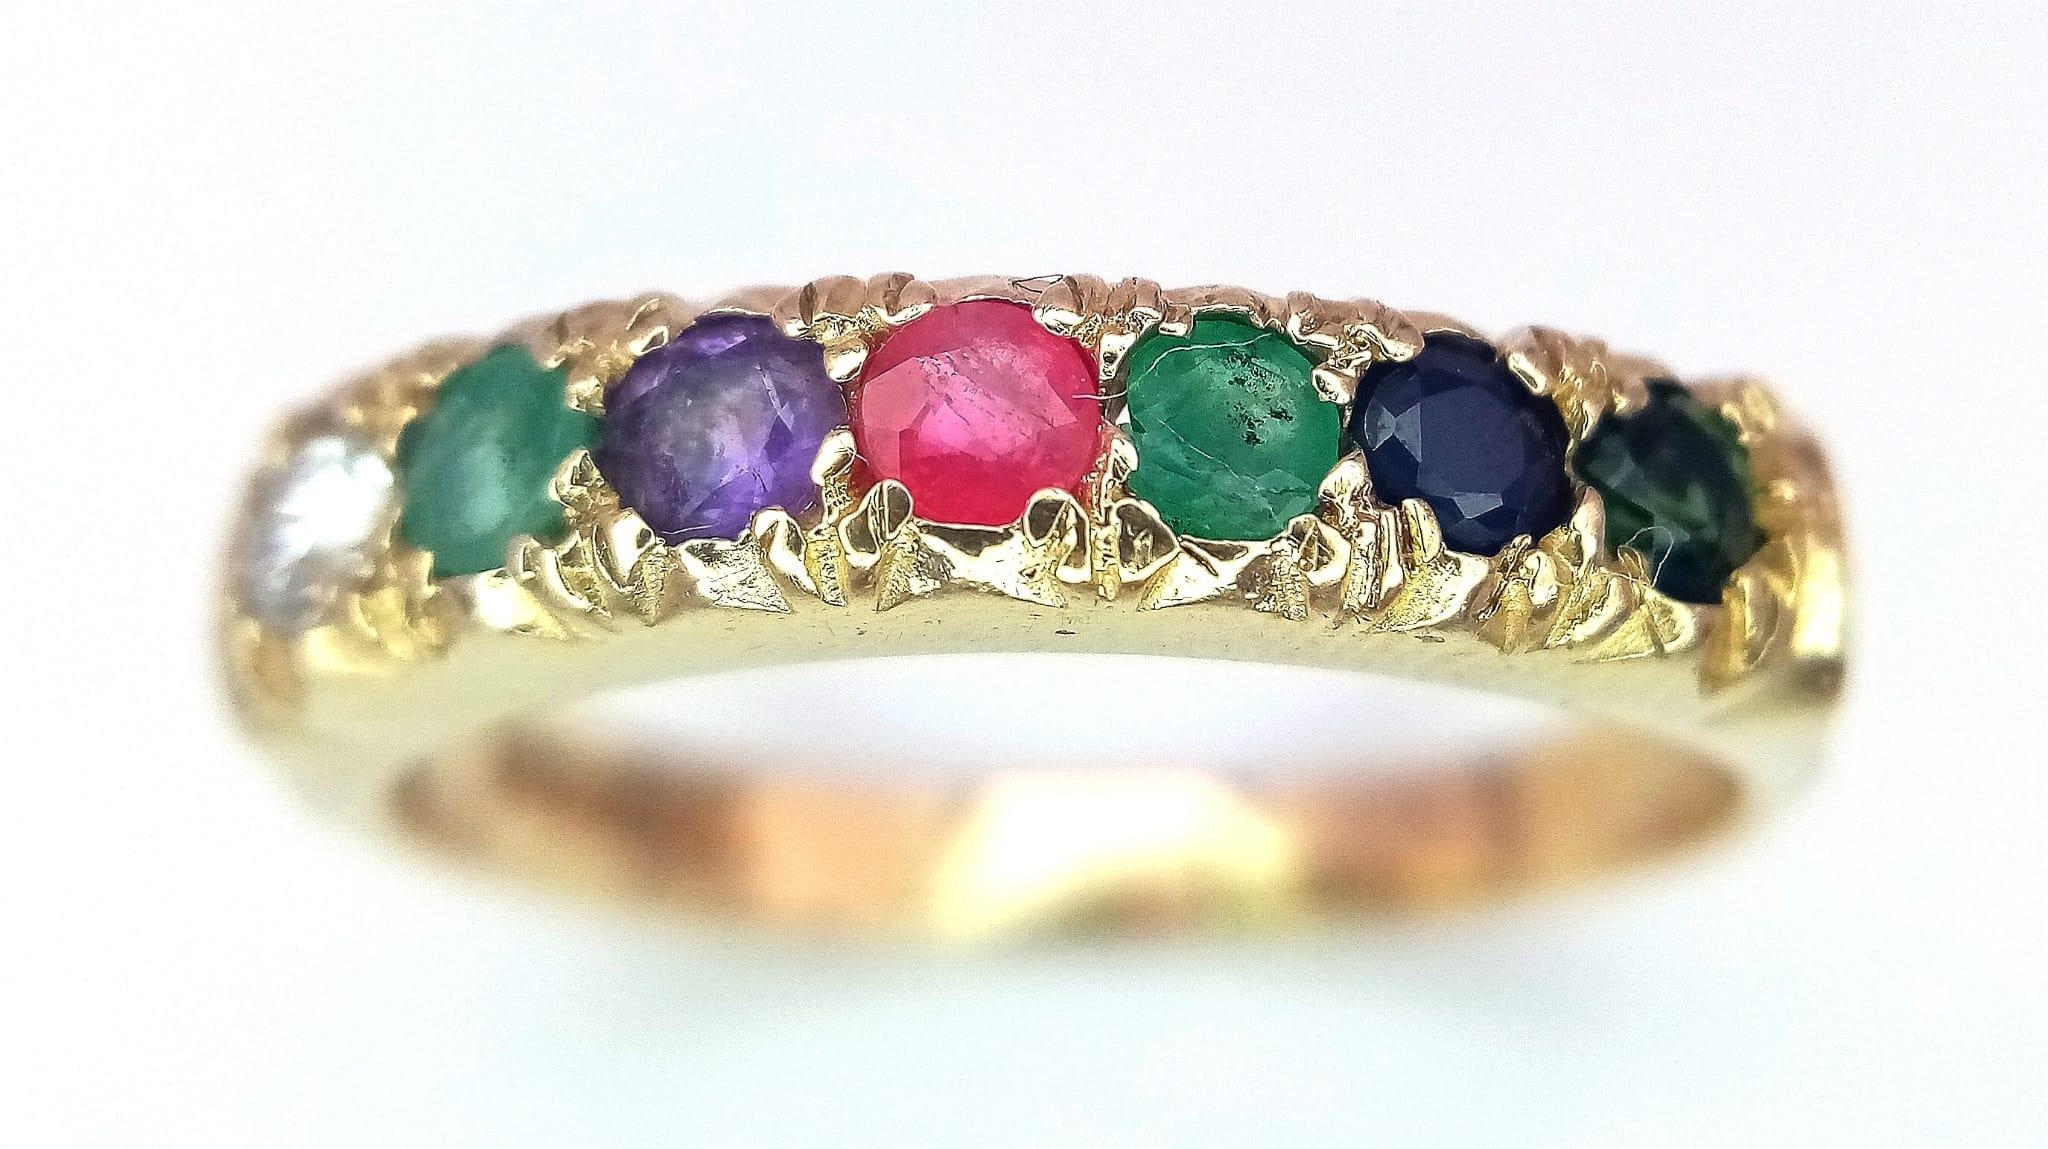 A PRETTY 9K YELLOW GOLD MULTI GEMSTONES SET DEAREST RING, WEIGHT 2.9G SIZE S - Image 2 of 11